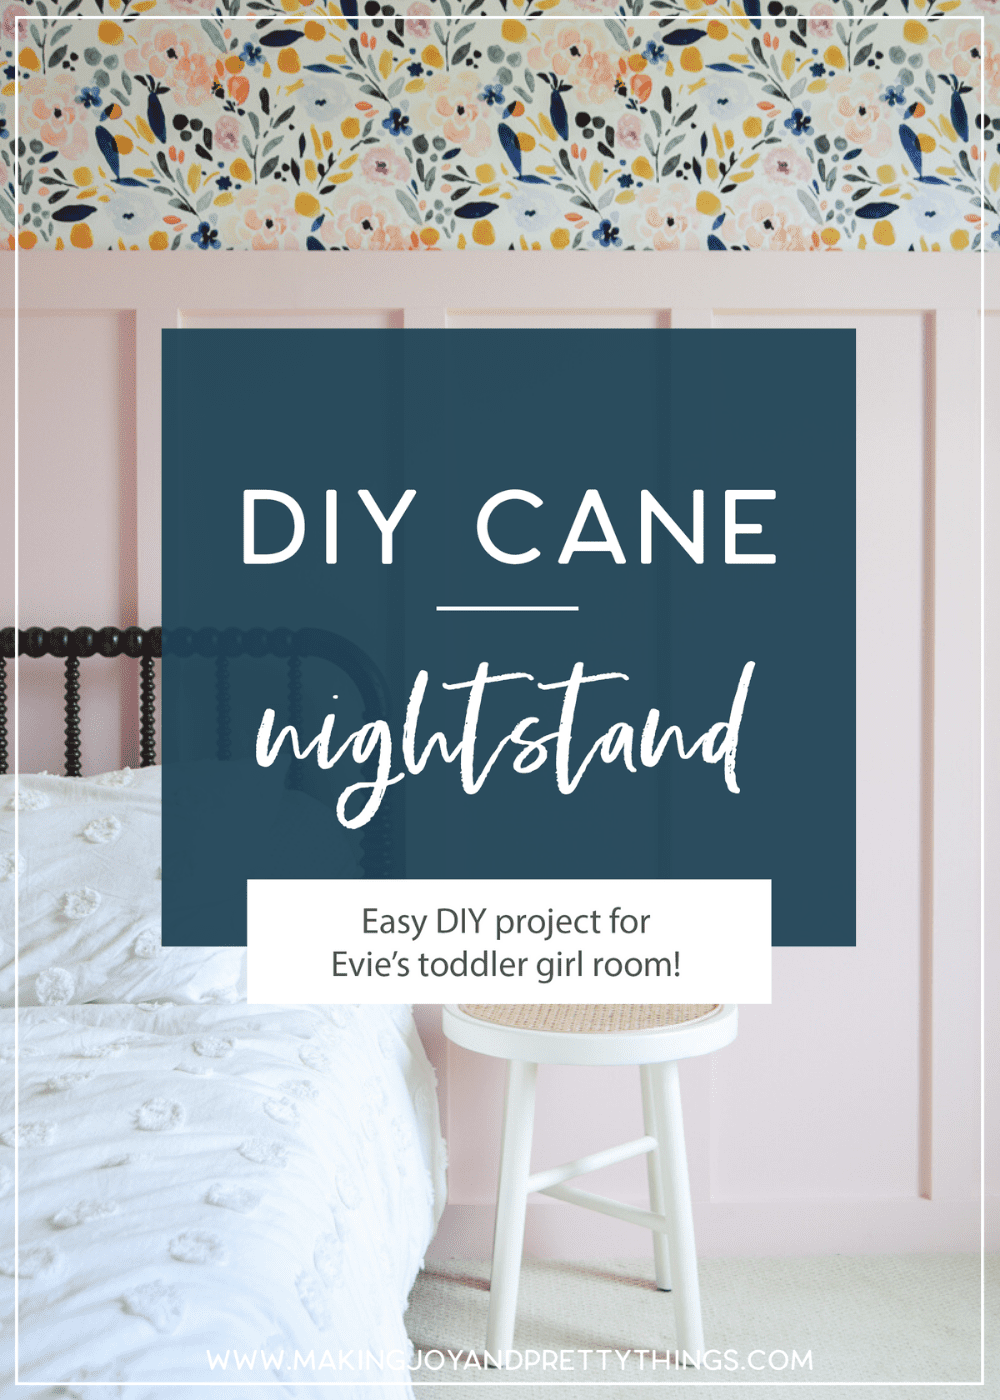 Looking for DIY nightstand ideas?  I tried my hand at DIY cane projects with a DIY cane nightstand for Evie’s toddler girl room!  I used a stool from Target, some spray paint, and cane to make a DIY nightstand.  It’s the perfect addition to a little girl’s room if you’re looking for girl room ideas.  The DIY cane nightstand was an easy DIY that adds tons of style and function to her girly room. #cane #canefurniture #diyprojects #diycanenightstand
